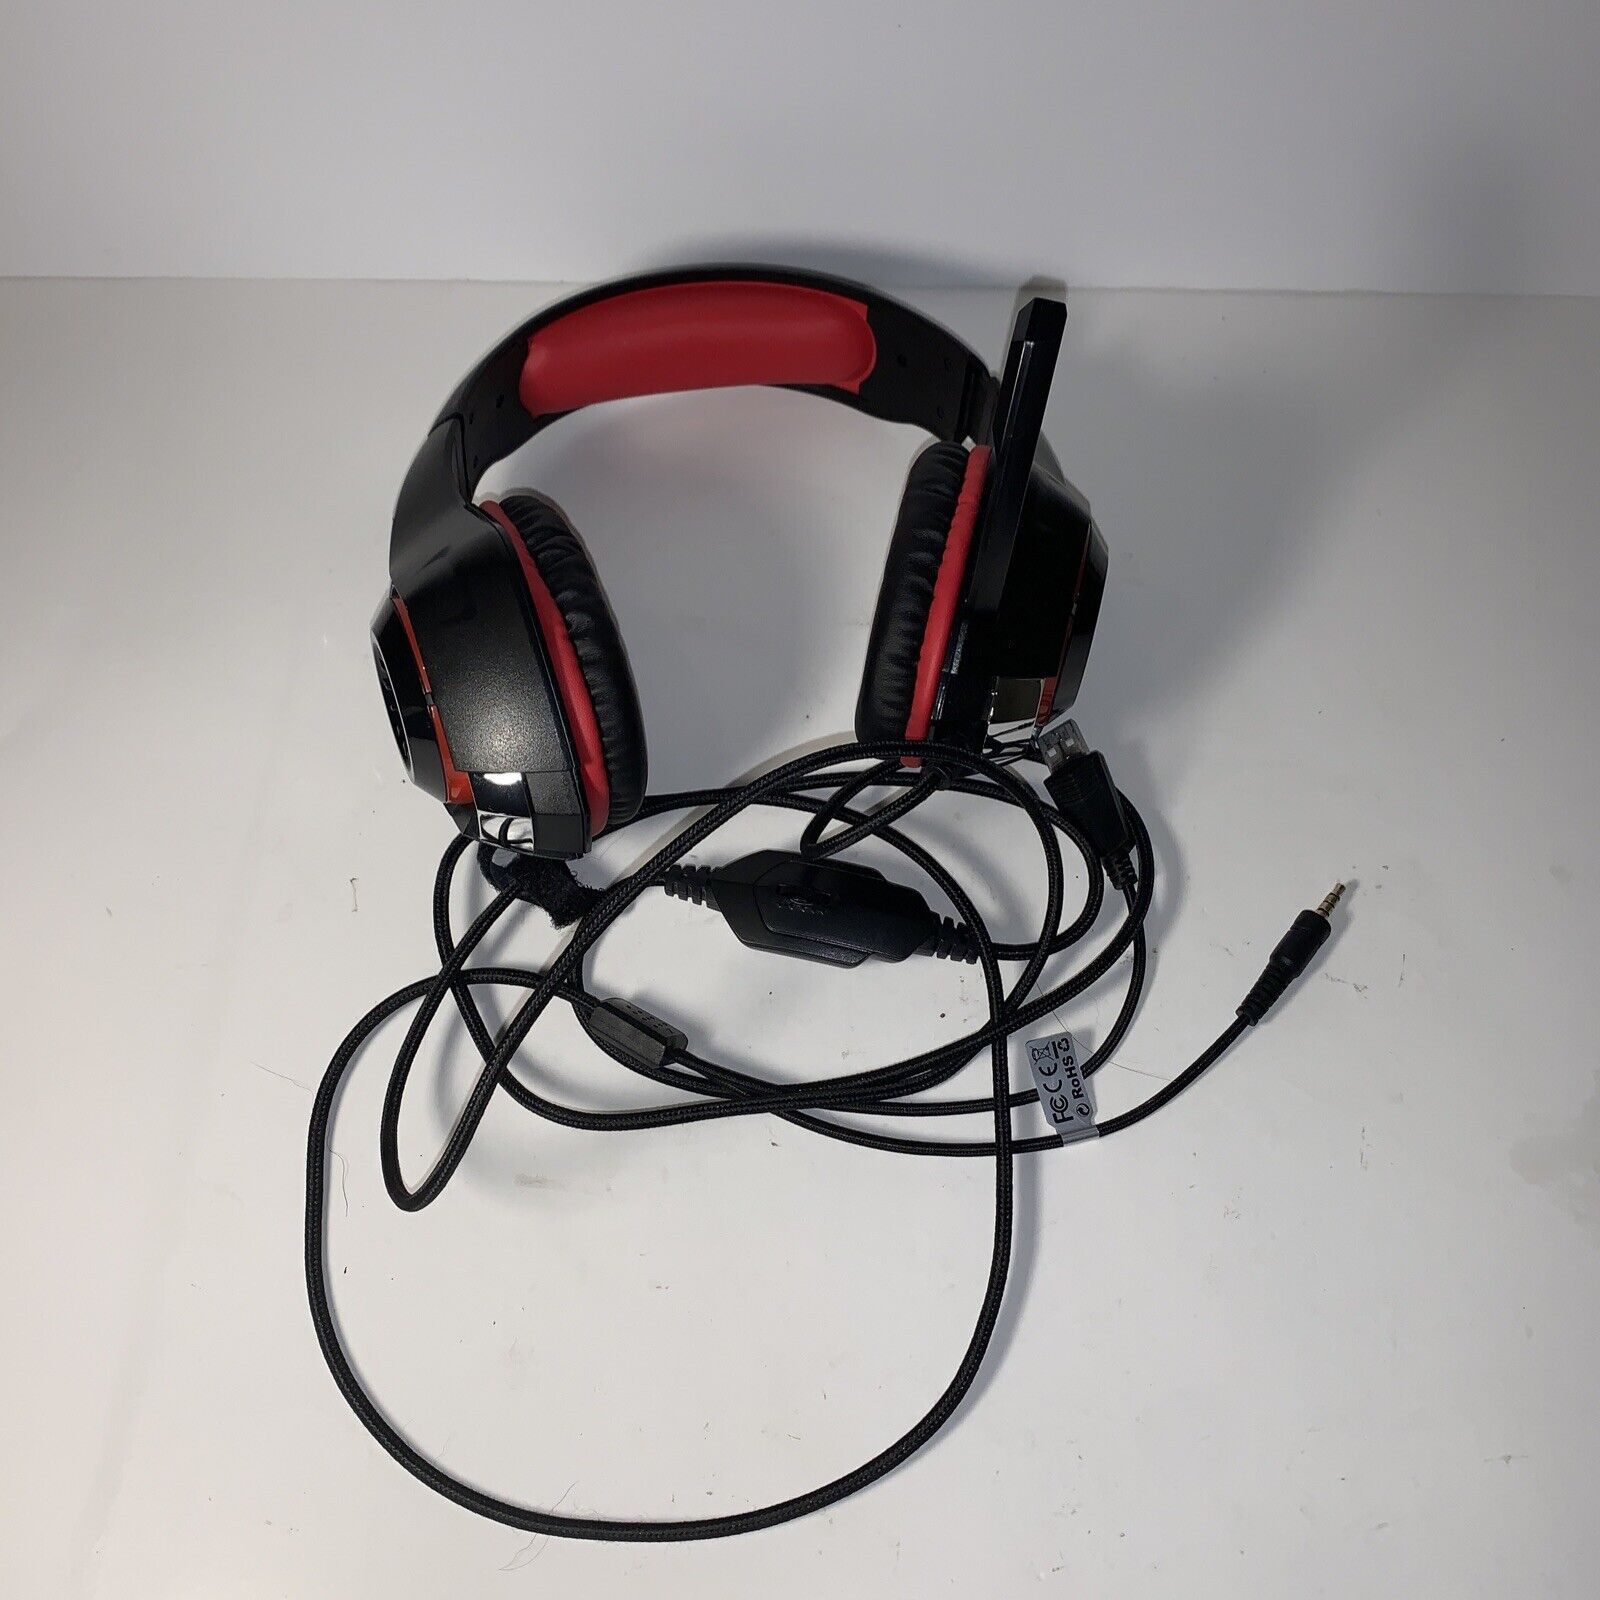 Beexcellent GM-1 Pro Gaming Headset Black+Red In GREAT CONDITION